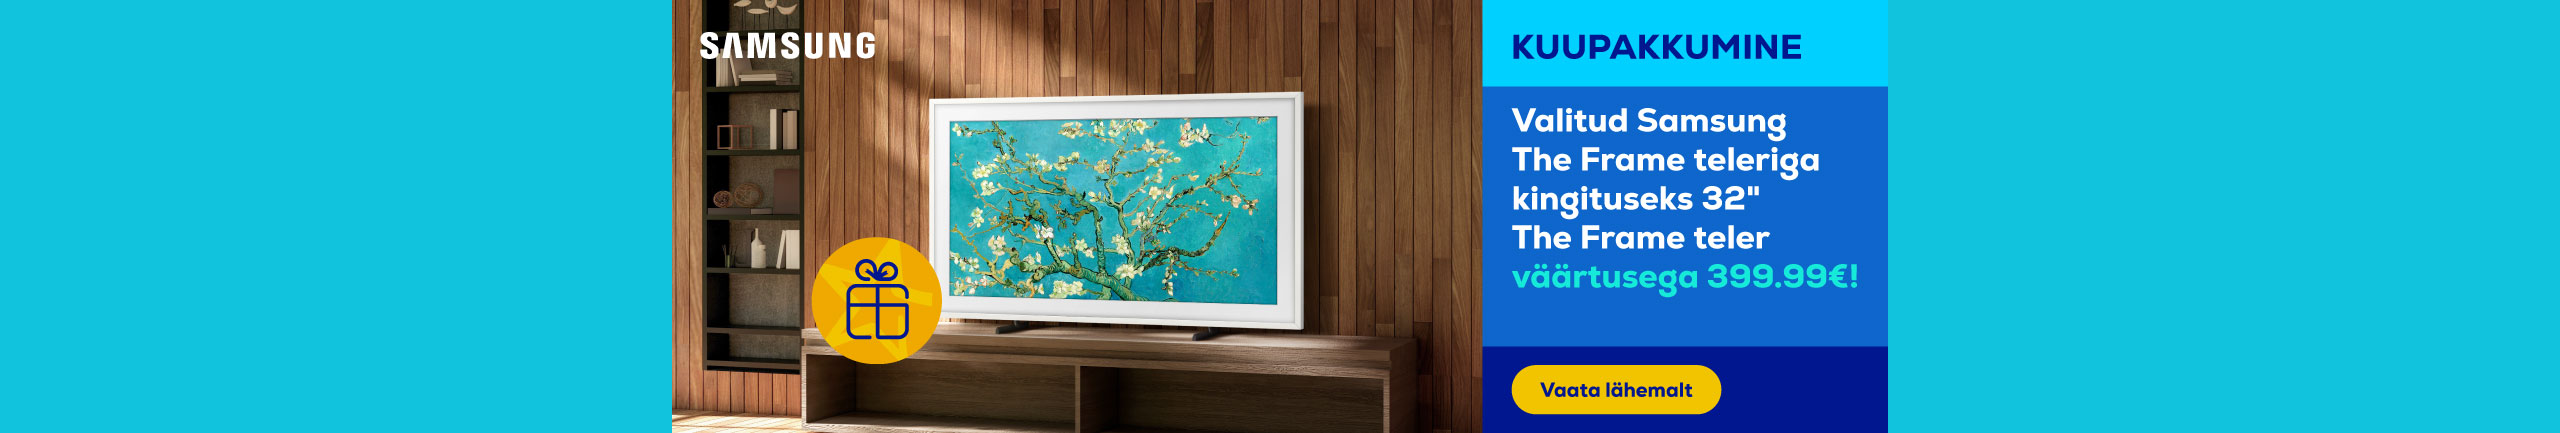 Buy a selected Samsung Frame TV and get a 32" Frame TV as a complimentary gift!